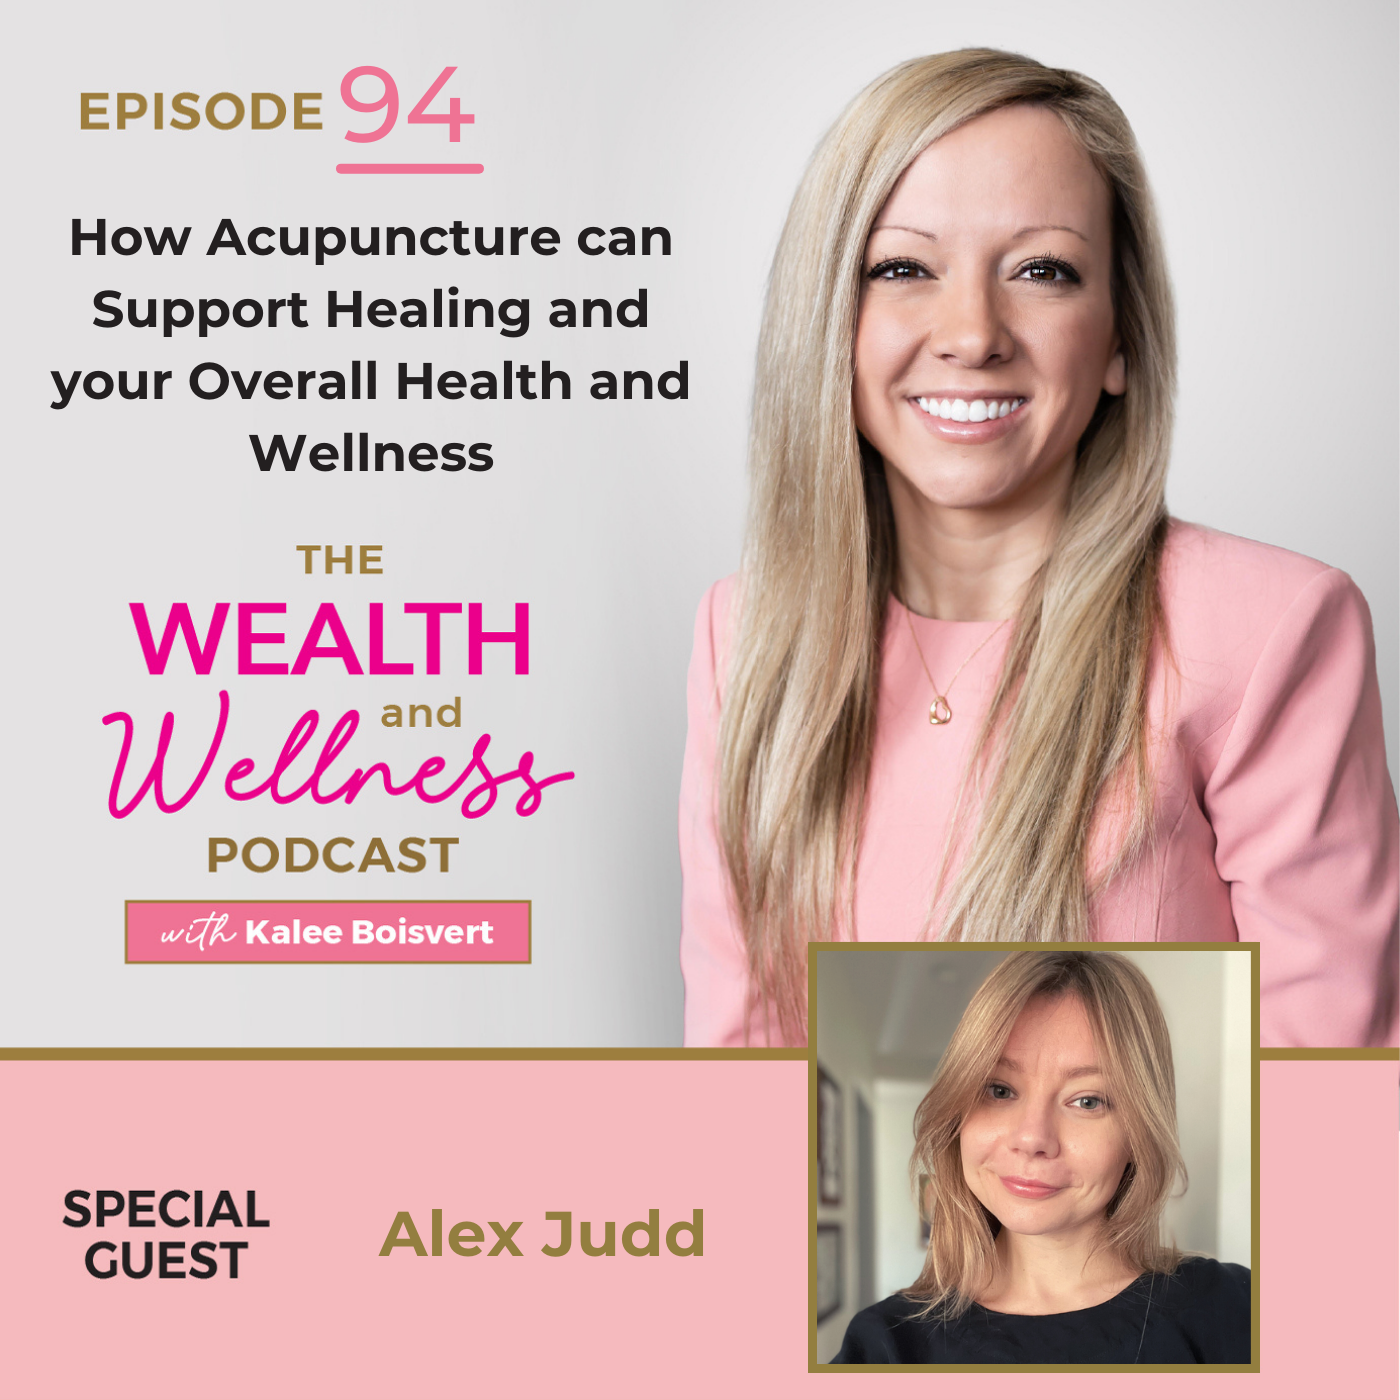 How Acupuncture can Support Healing and your Overall Health and Wellness